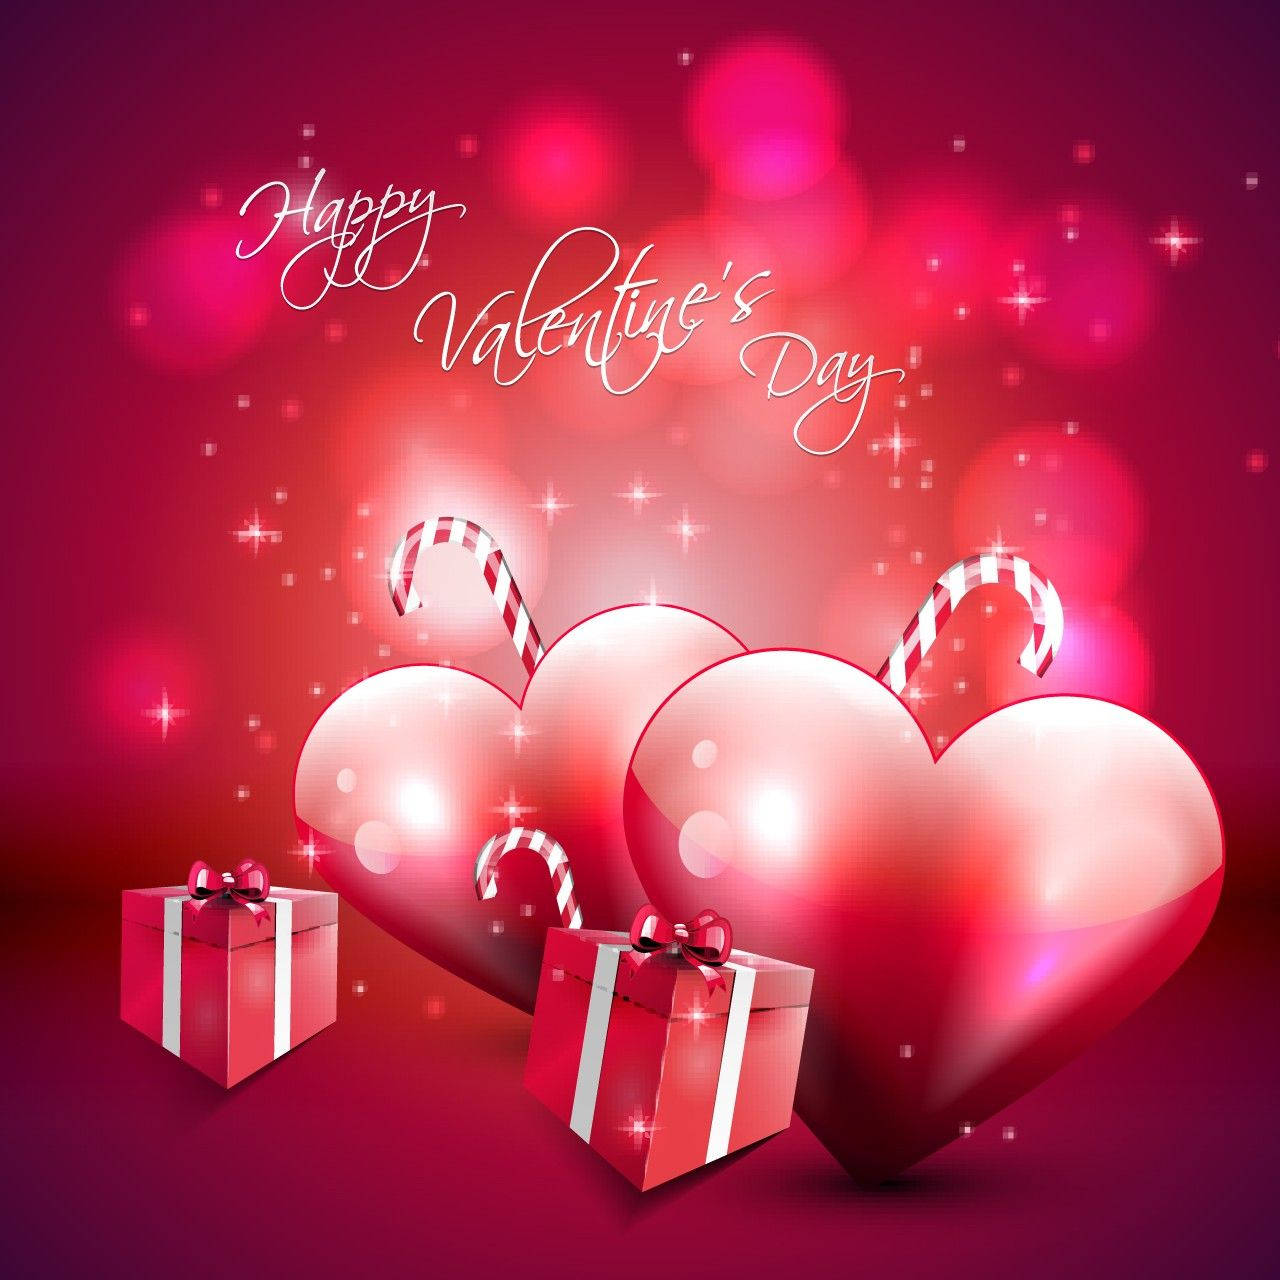 Cute Valentine's Day Heart Canes Gifts Wallpaper